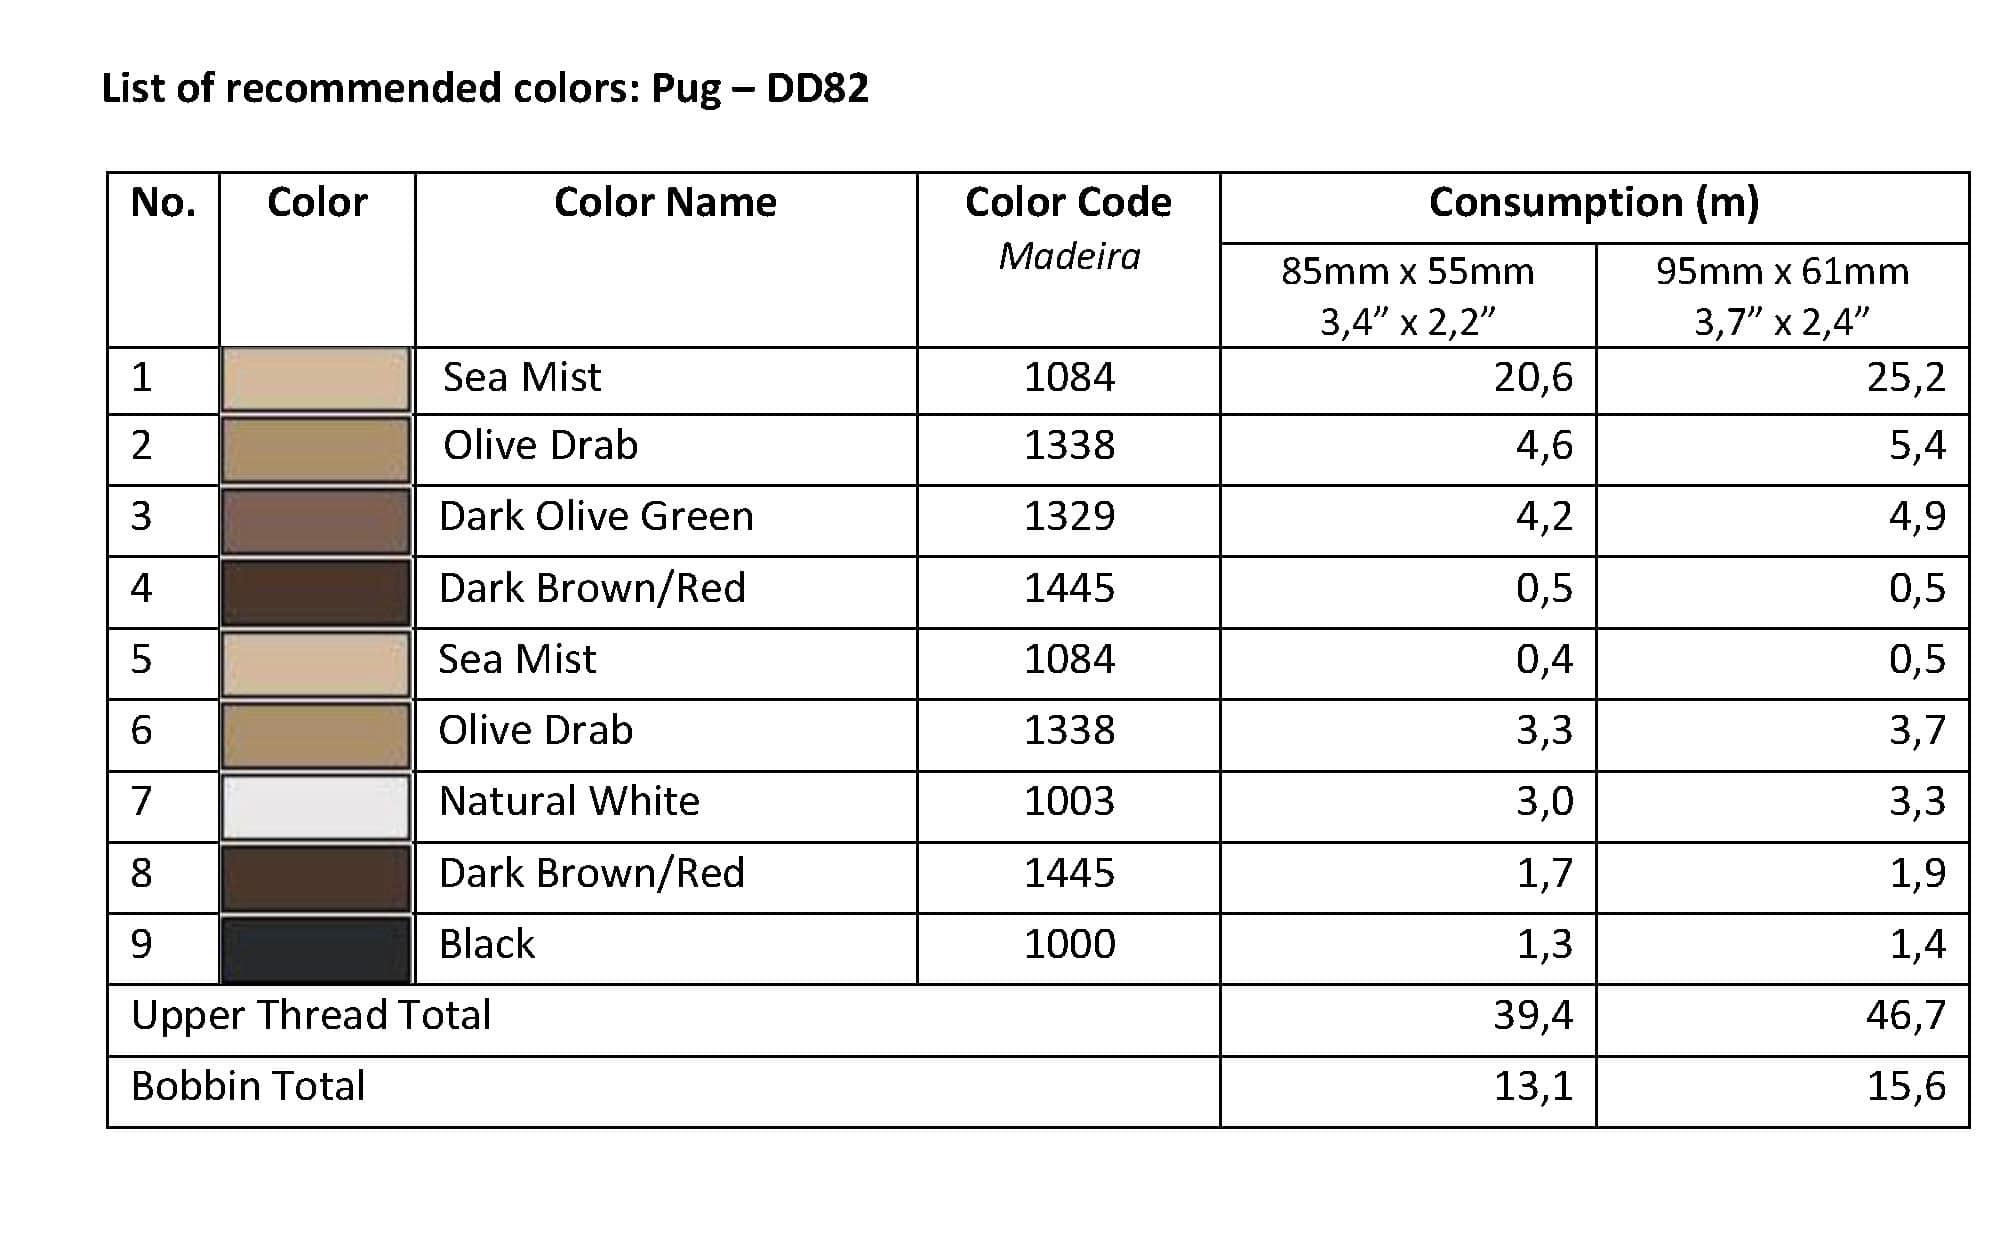 List of Recommended Colors -  Pug DD82